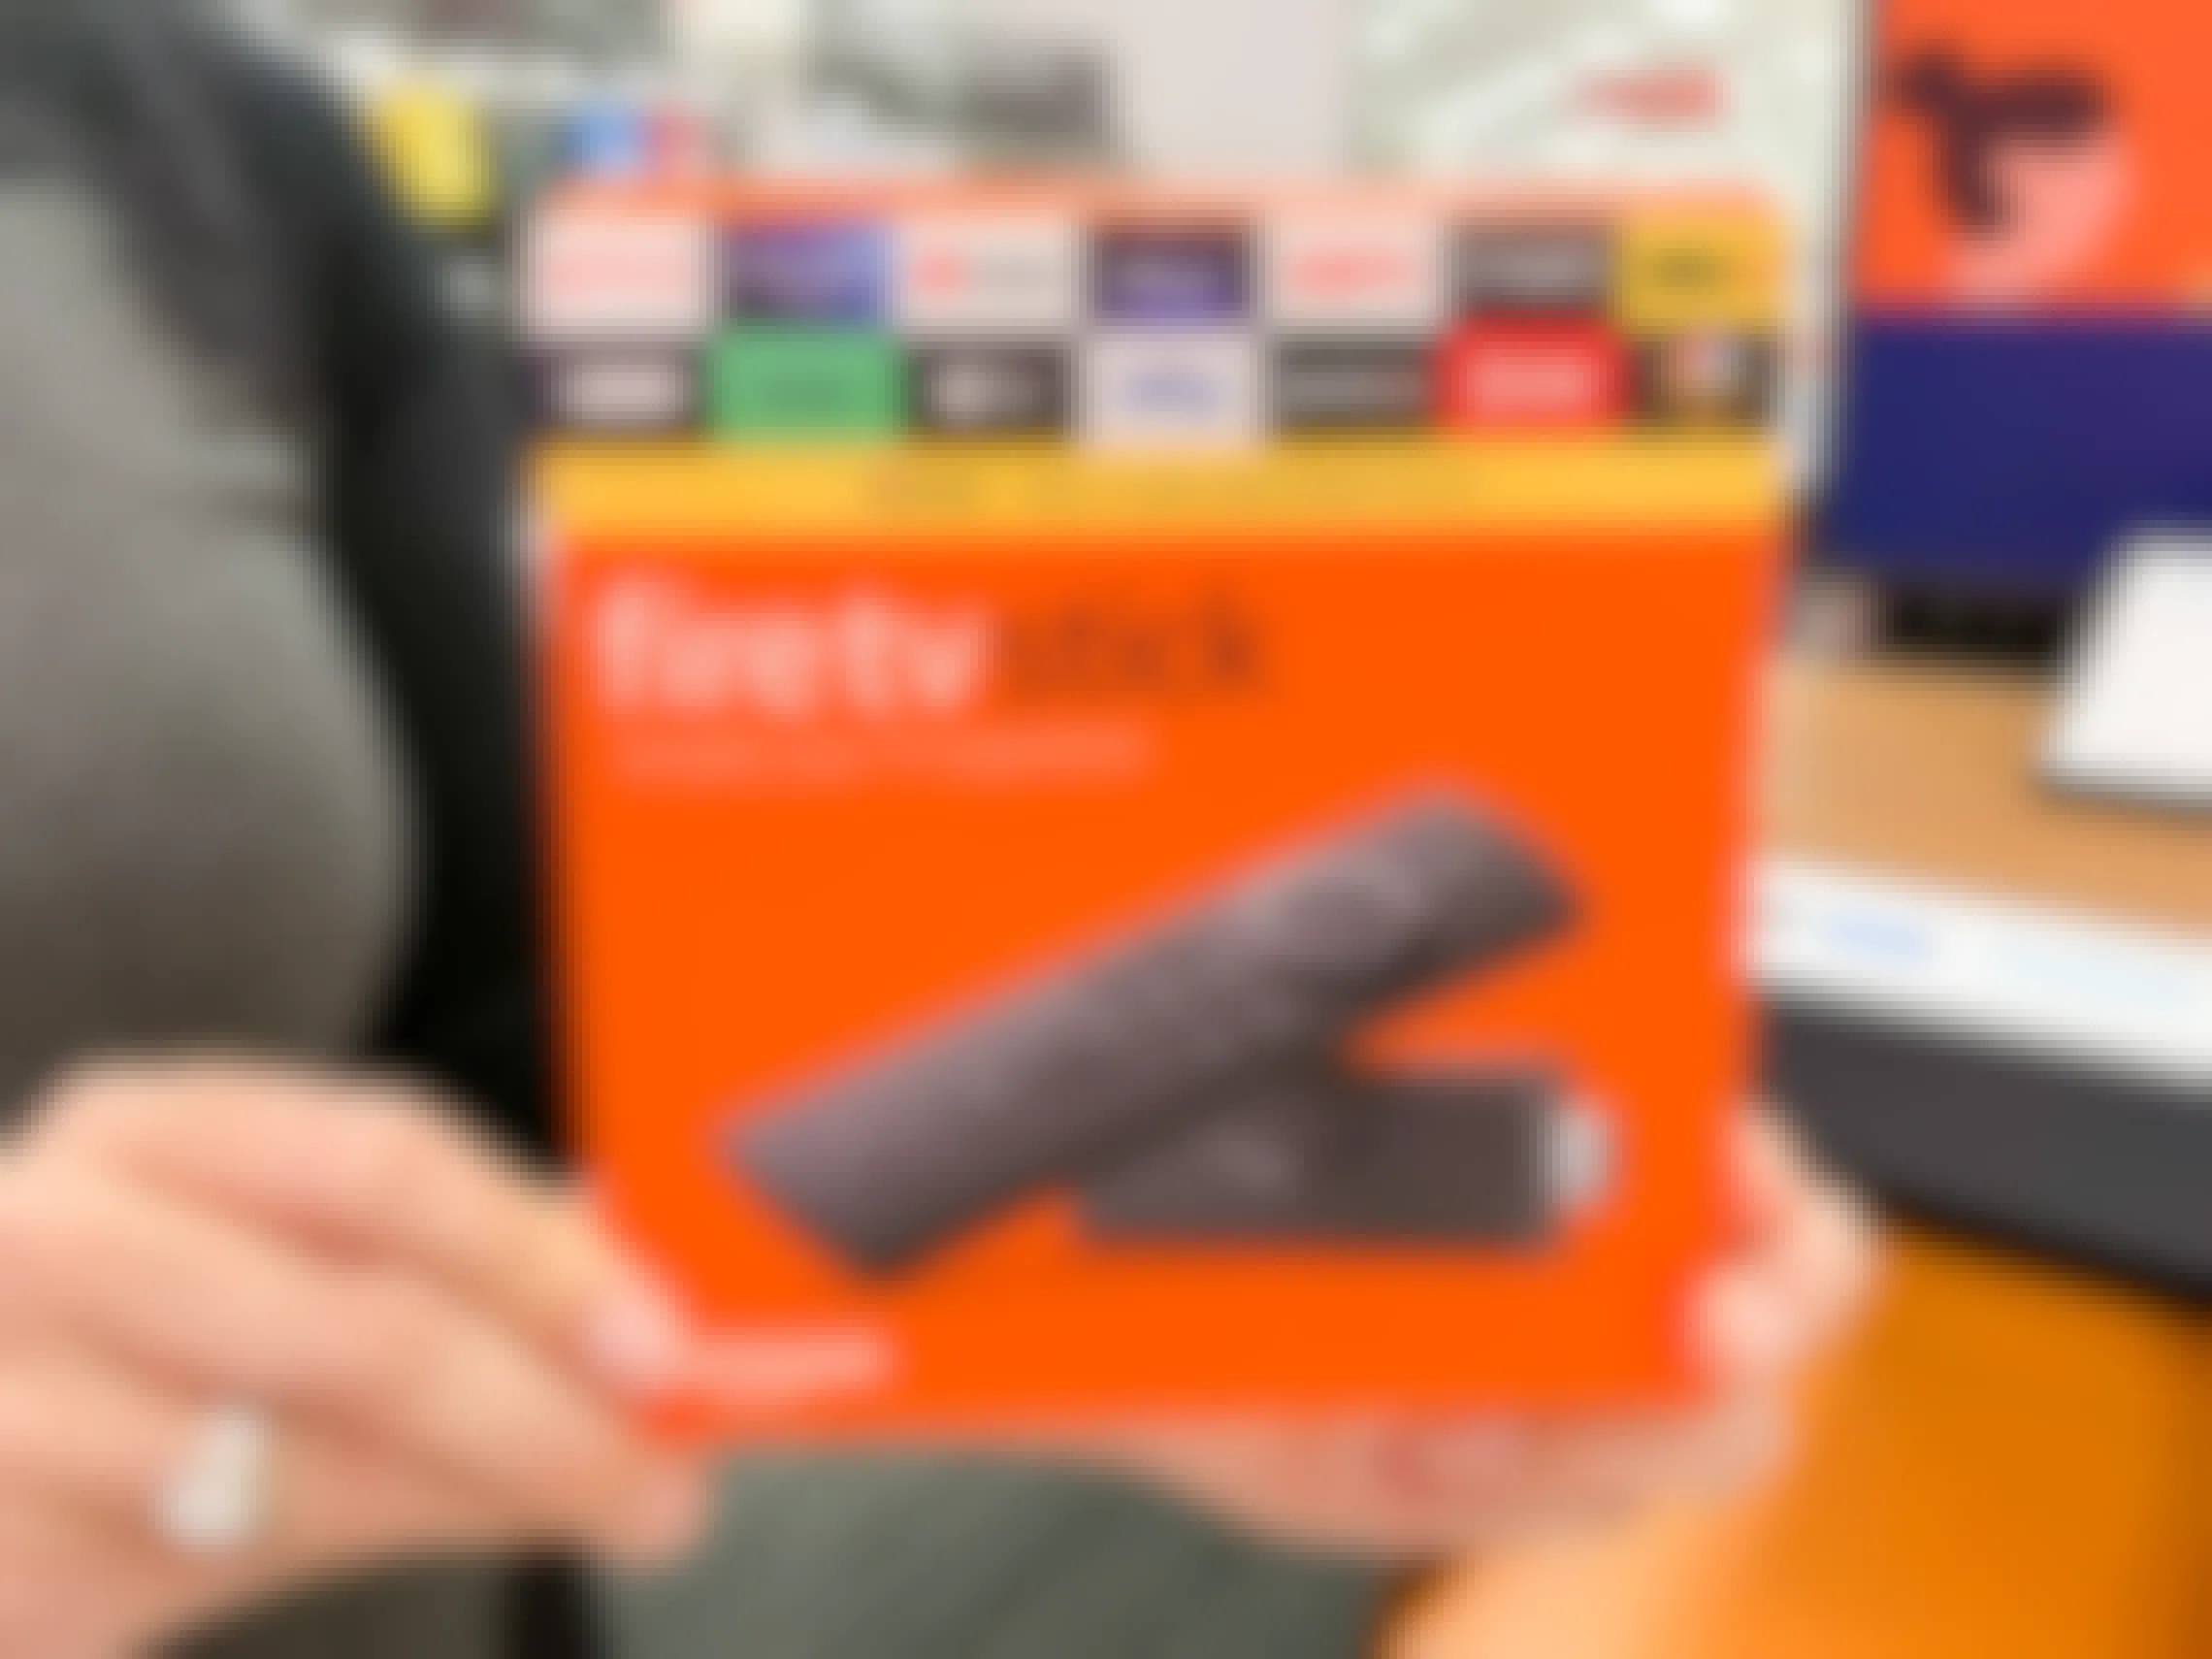 A person holding up an Amazon Fire TV Stick inside of a store.